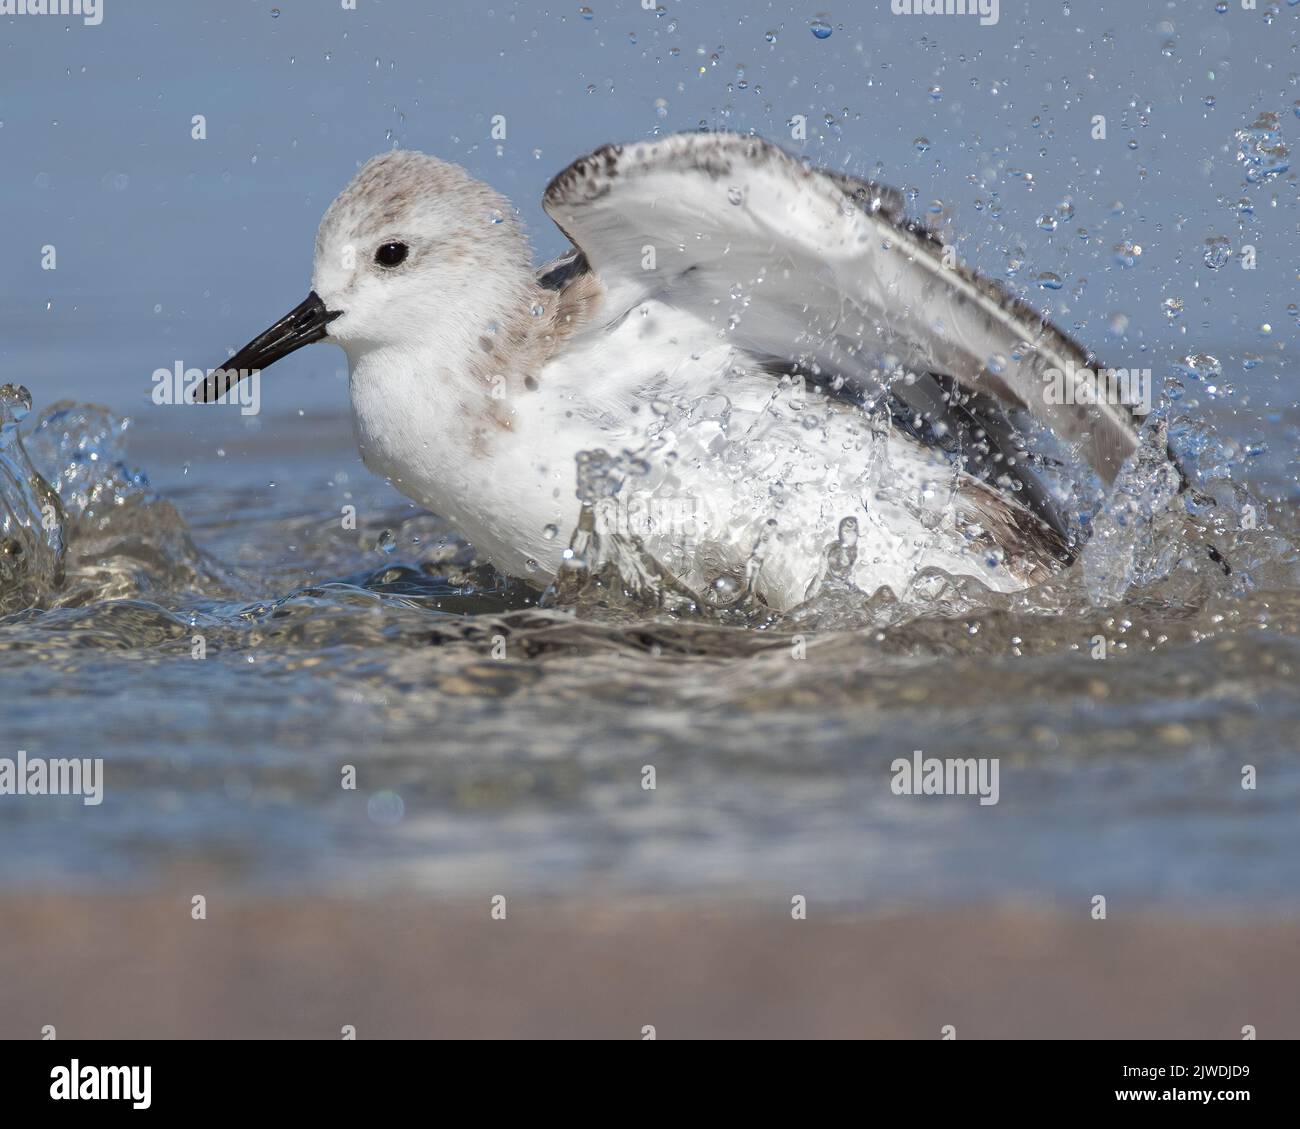 A sanderling bathing in the surf. Stock Photo